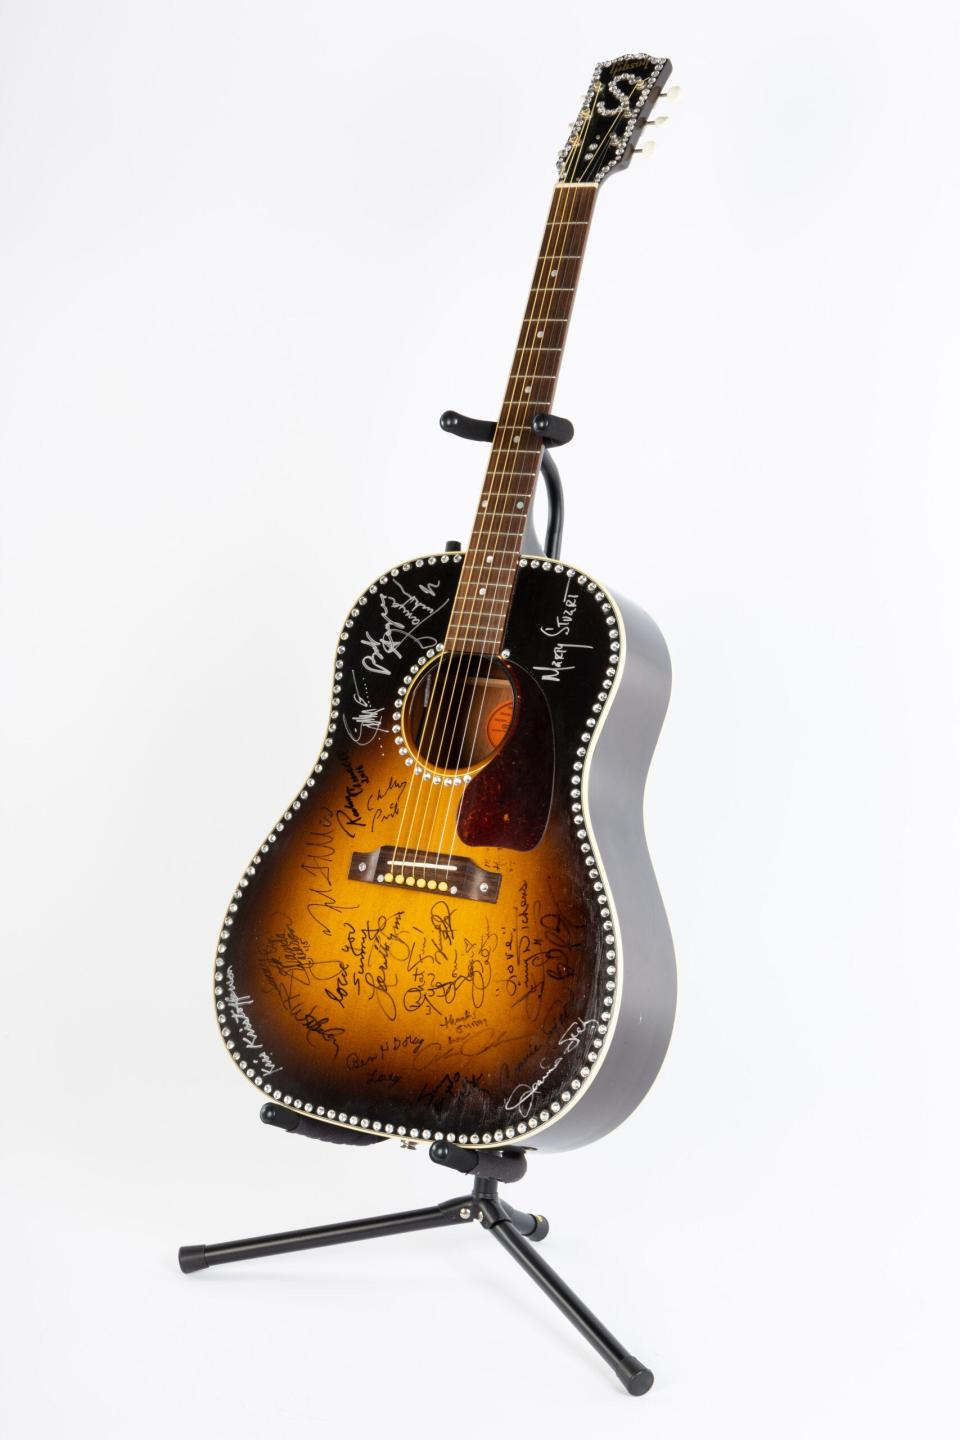 Sunny Sweeney has used this customized Gibson J-45 Historic Collection acoustic guitar to write songs, record and perform. The instrument is adorned with rhinestones and the signatures of many of her favorite artists.